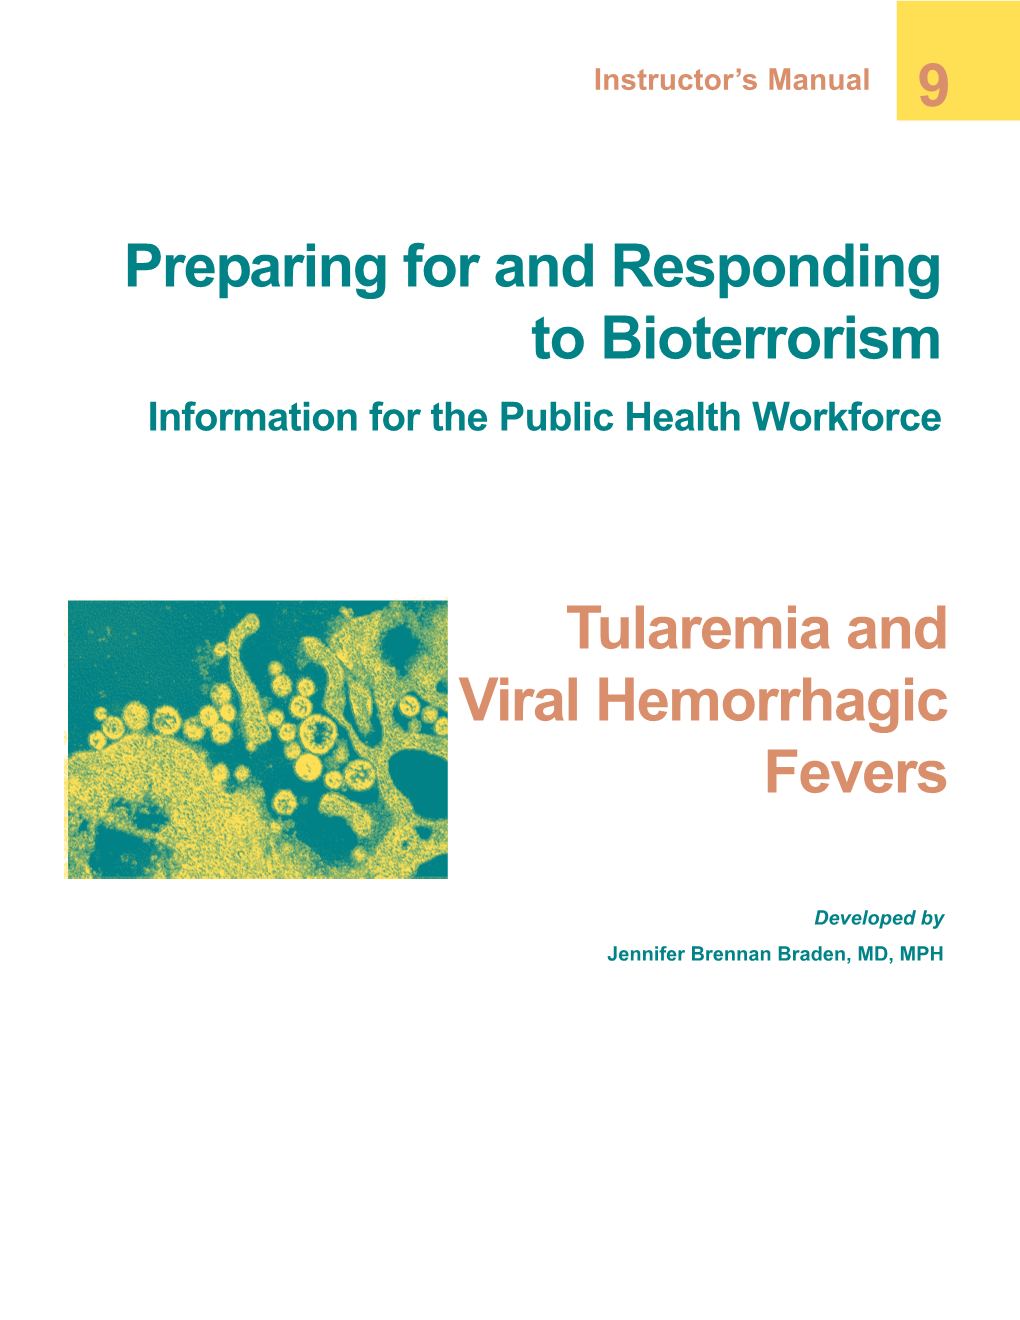 Preparing for and Responding to Bioterrorism Tularemia and Viral